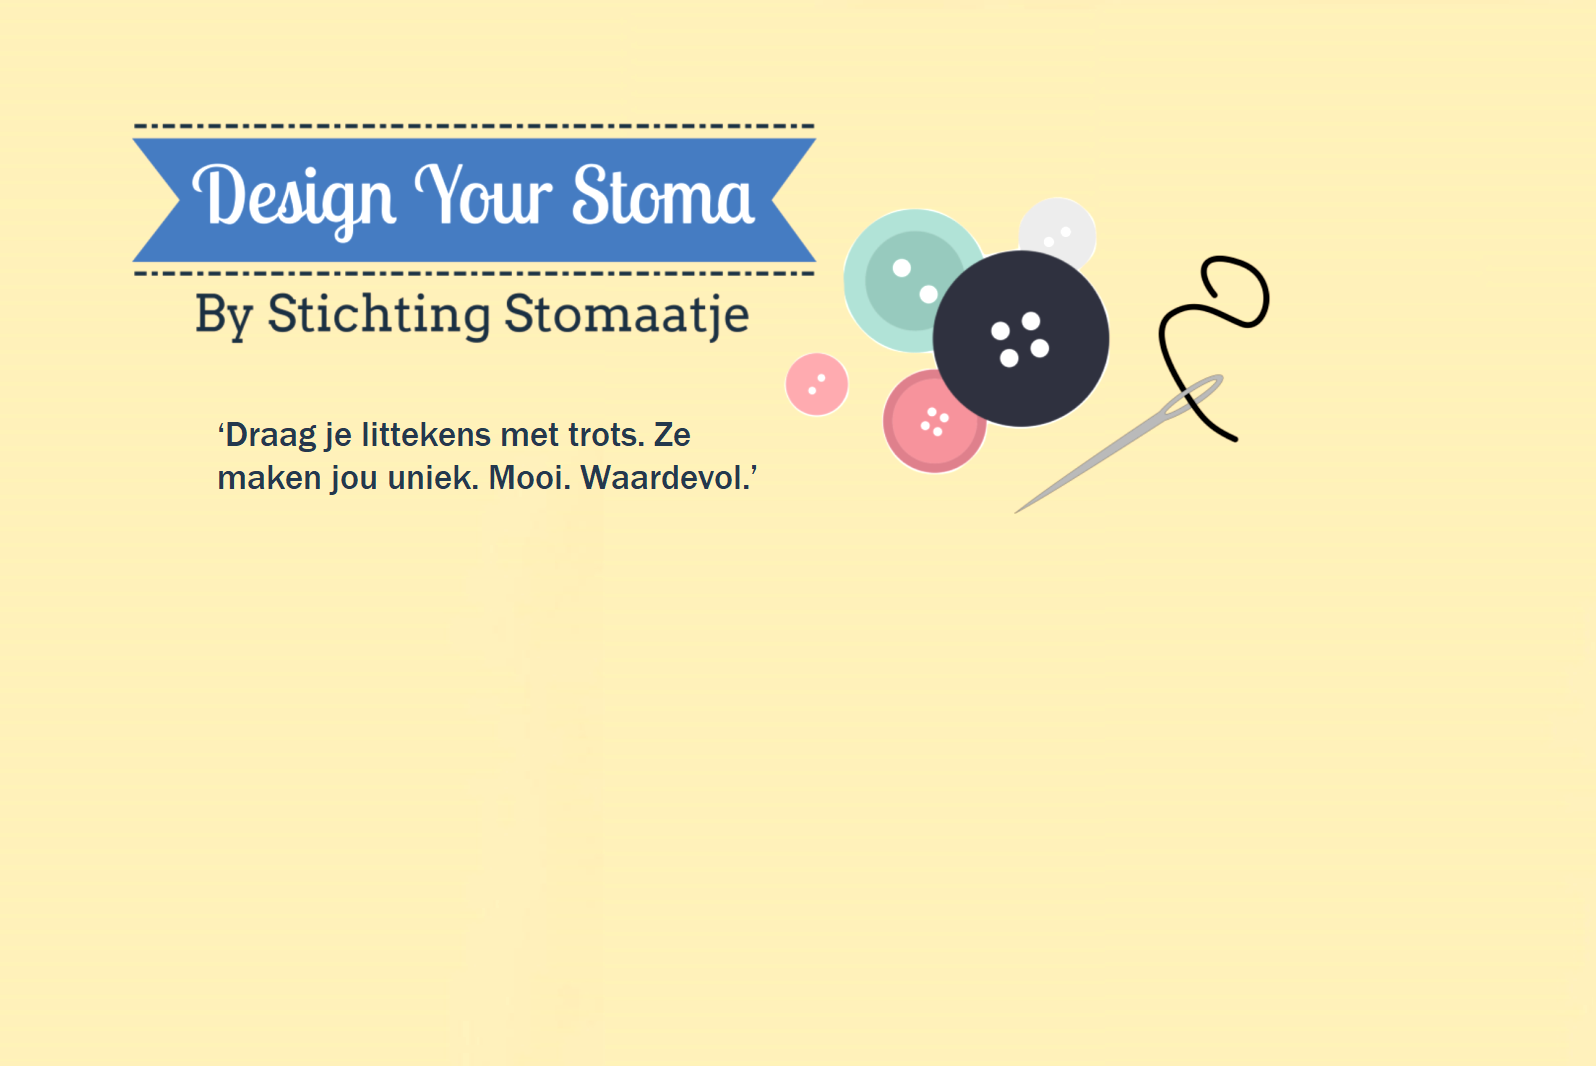 Design Your Stoma By Stichting Stomaatje